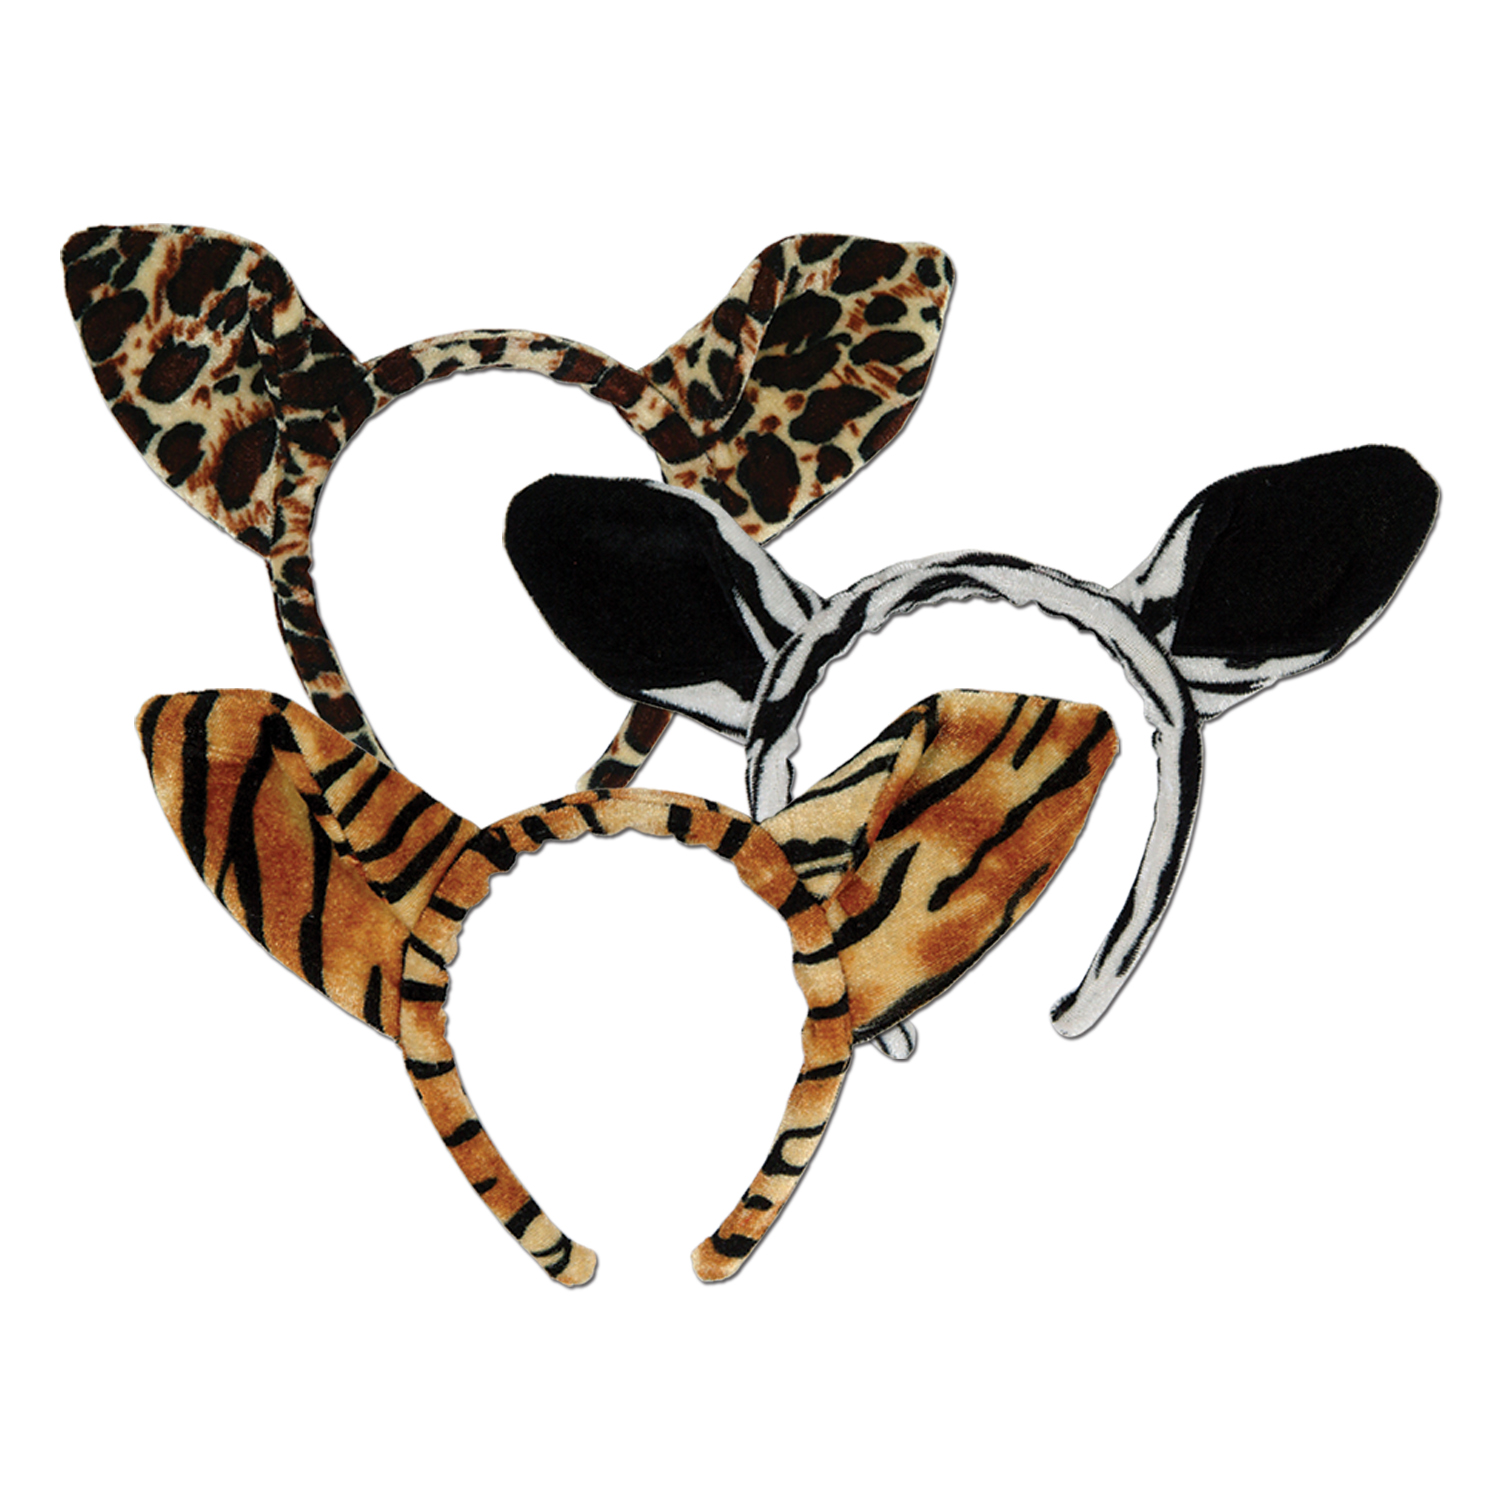 Soft-Touch Animal Print Ears